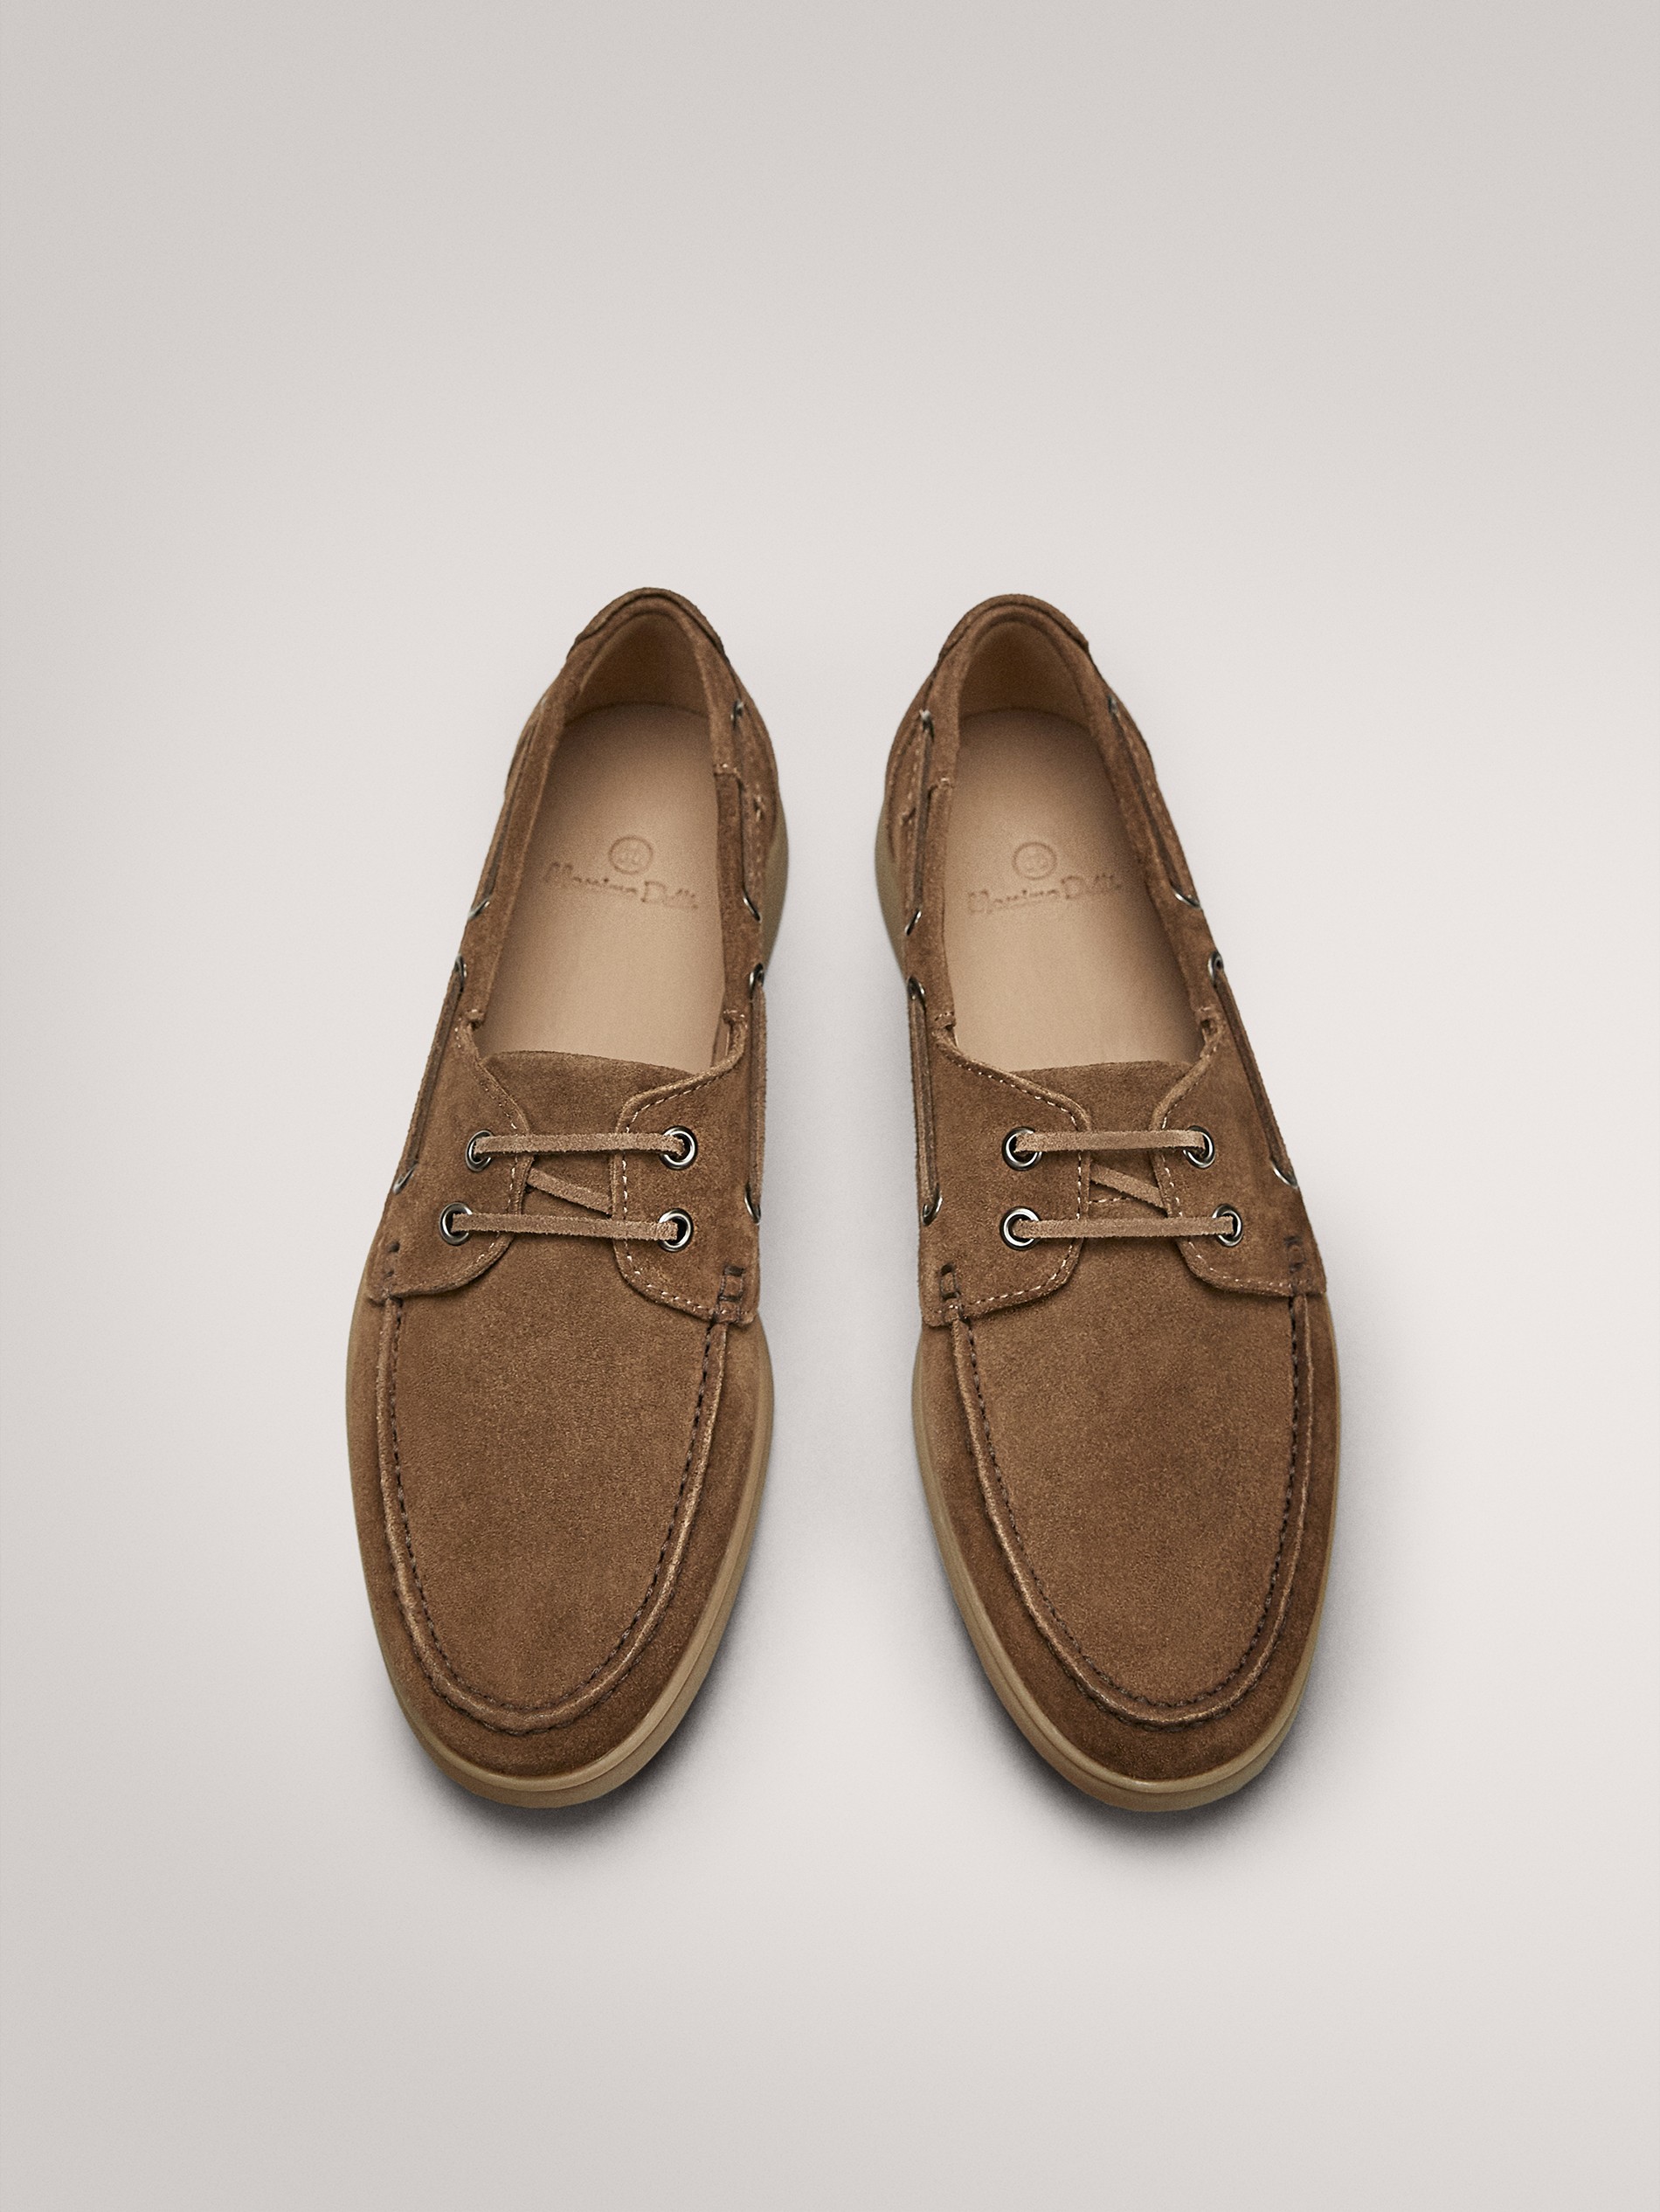 camel colour loafers